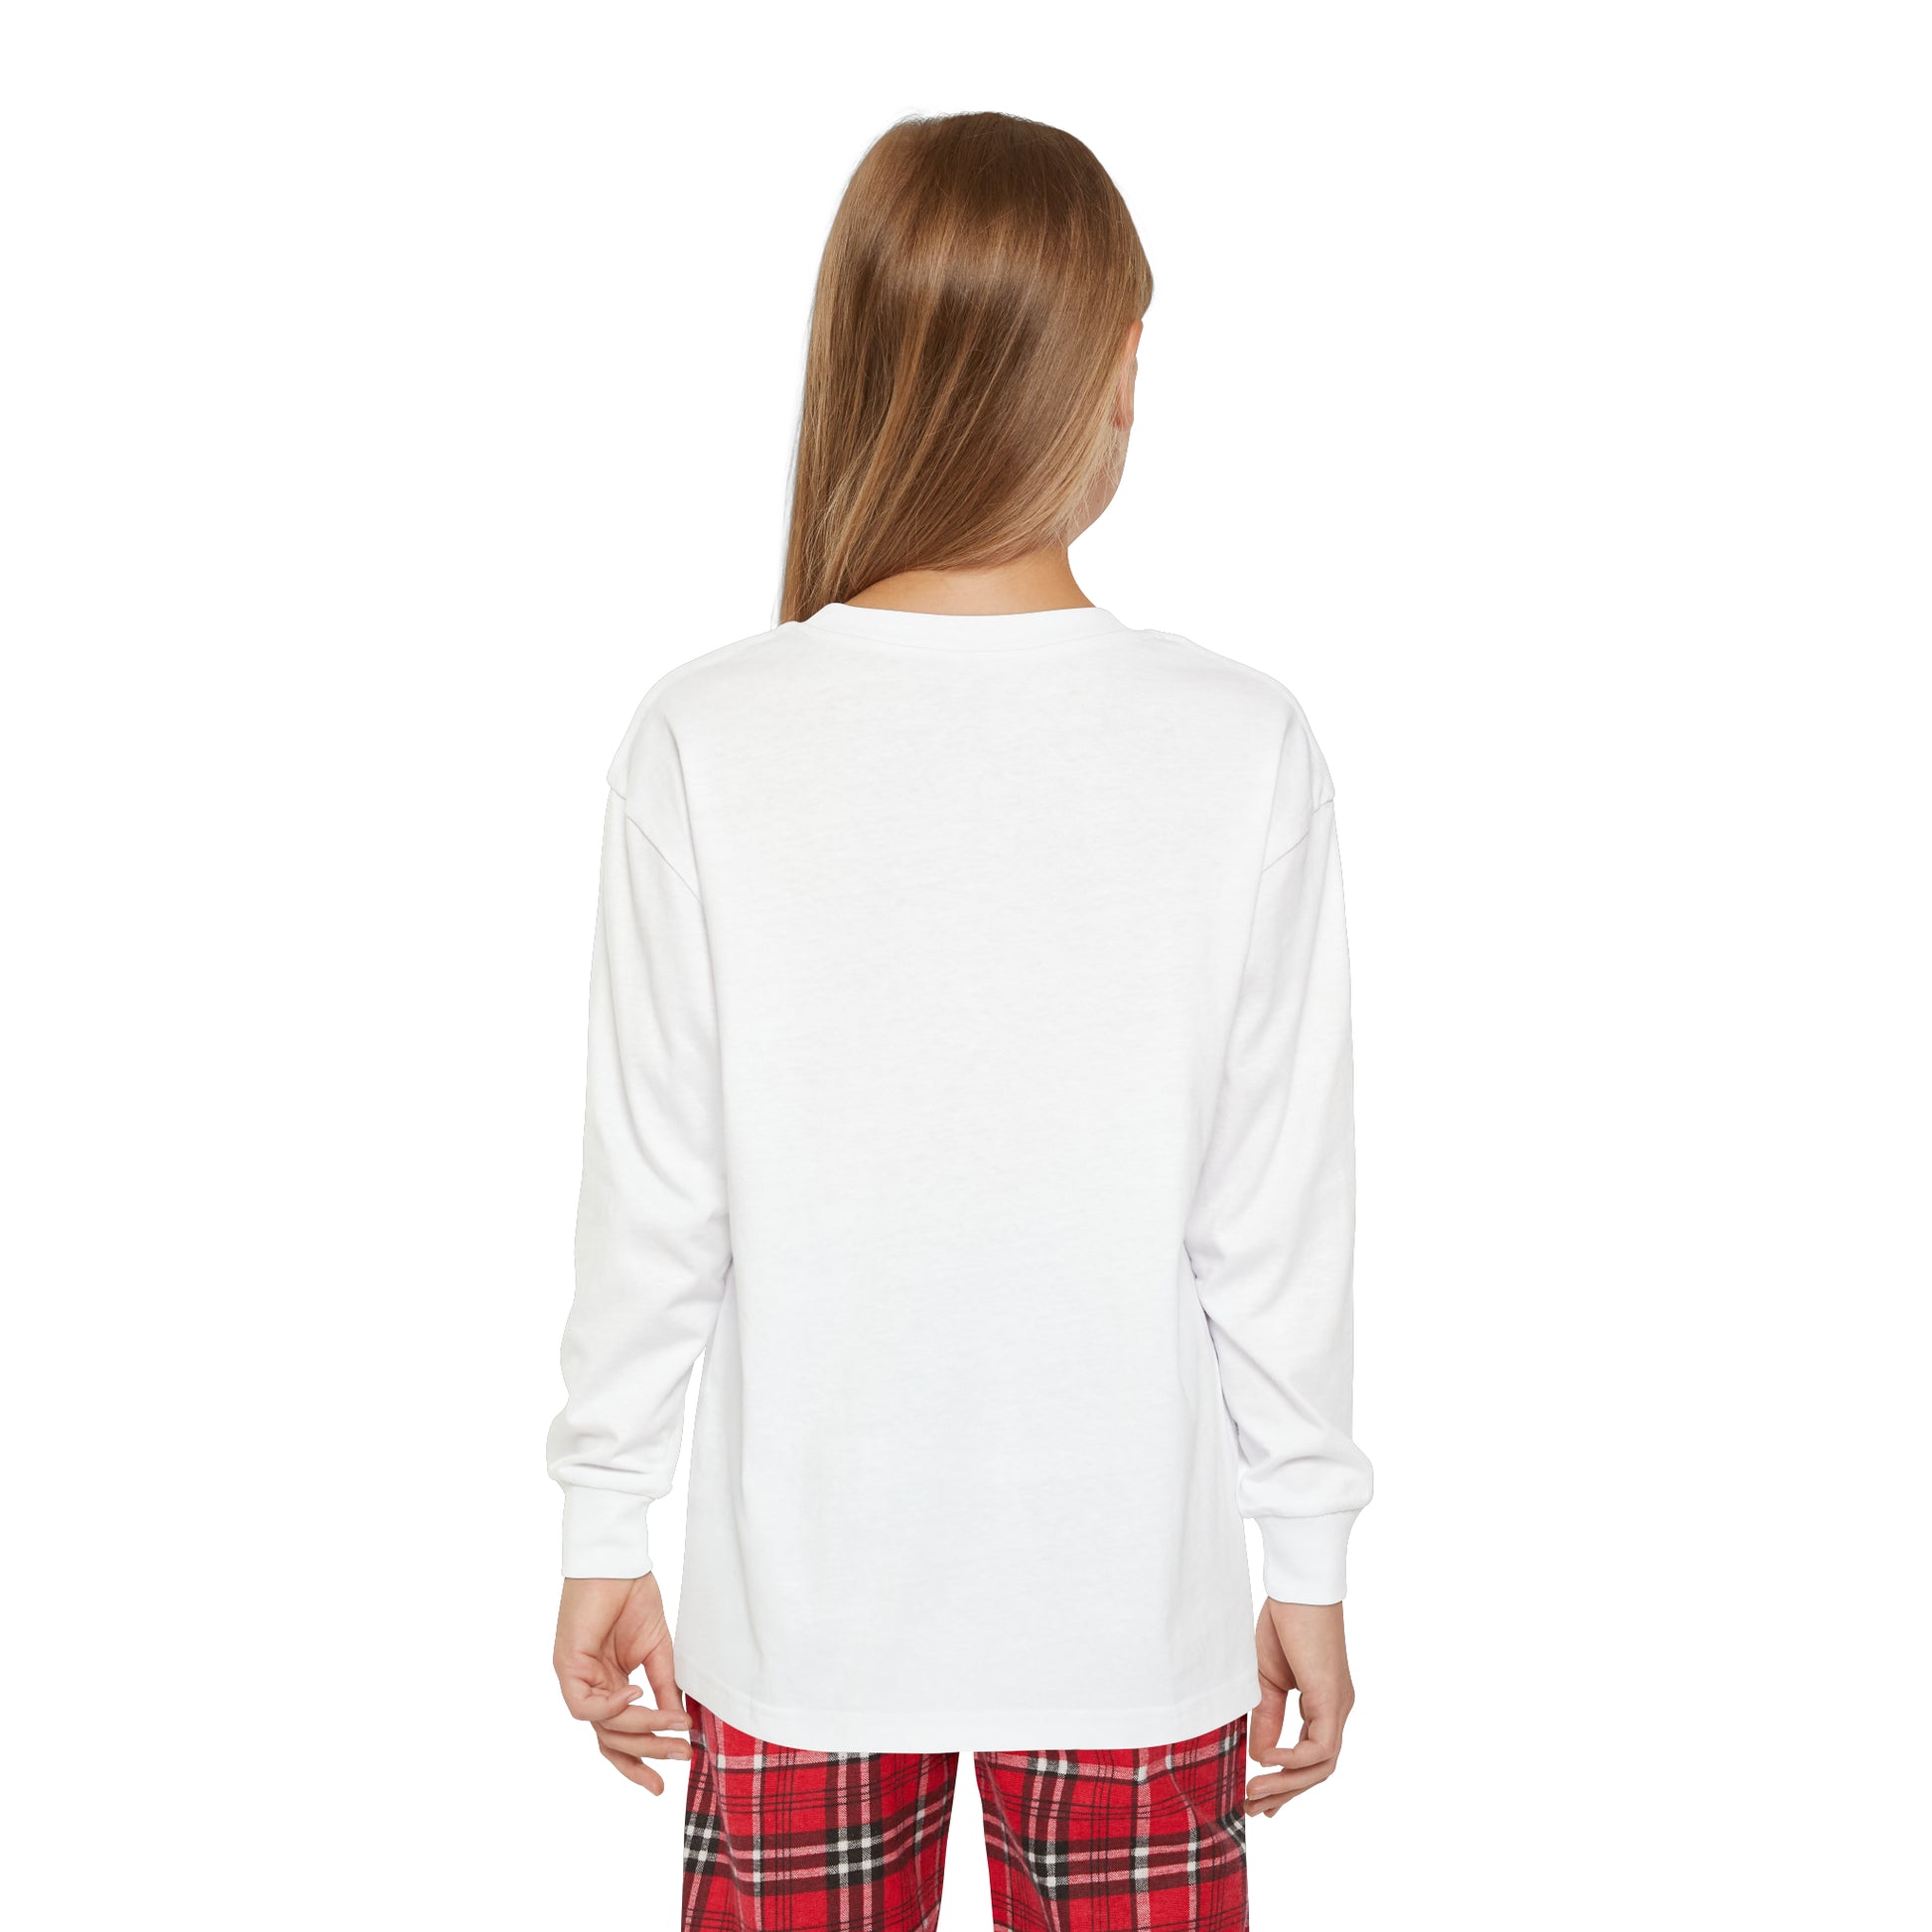 Divinely Inspired Purposefully Created Youth Christian Long Sleeve Pajama Set Printify